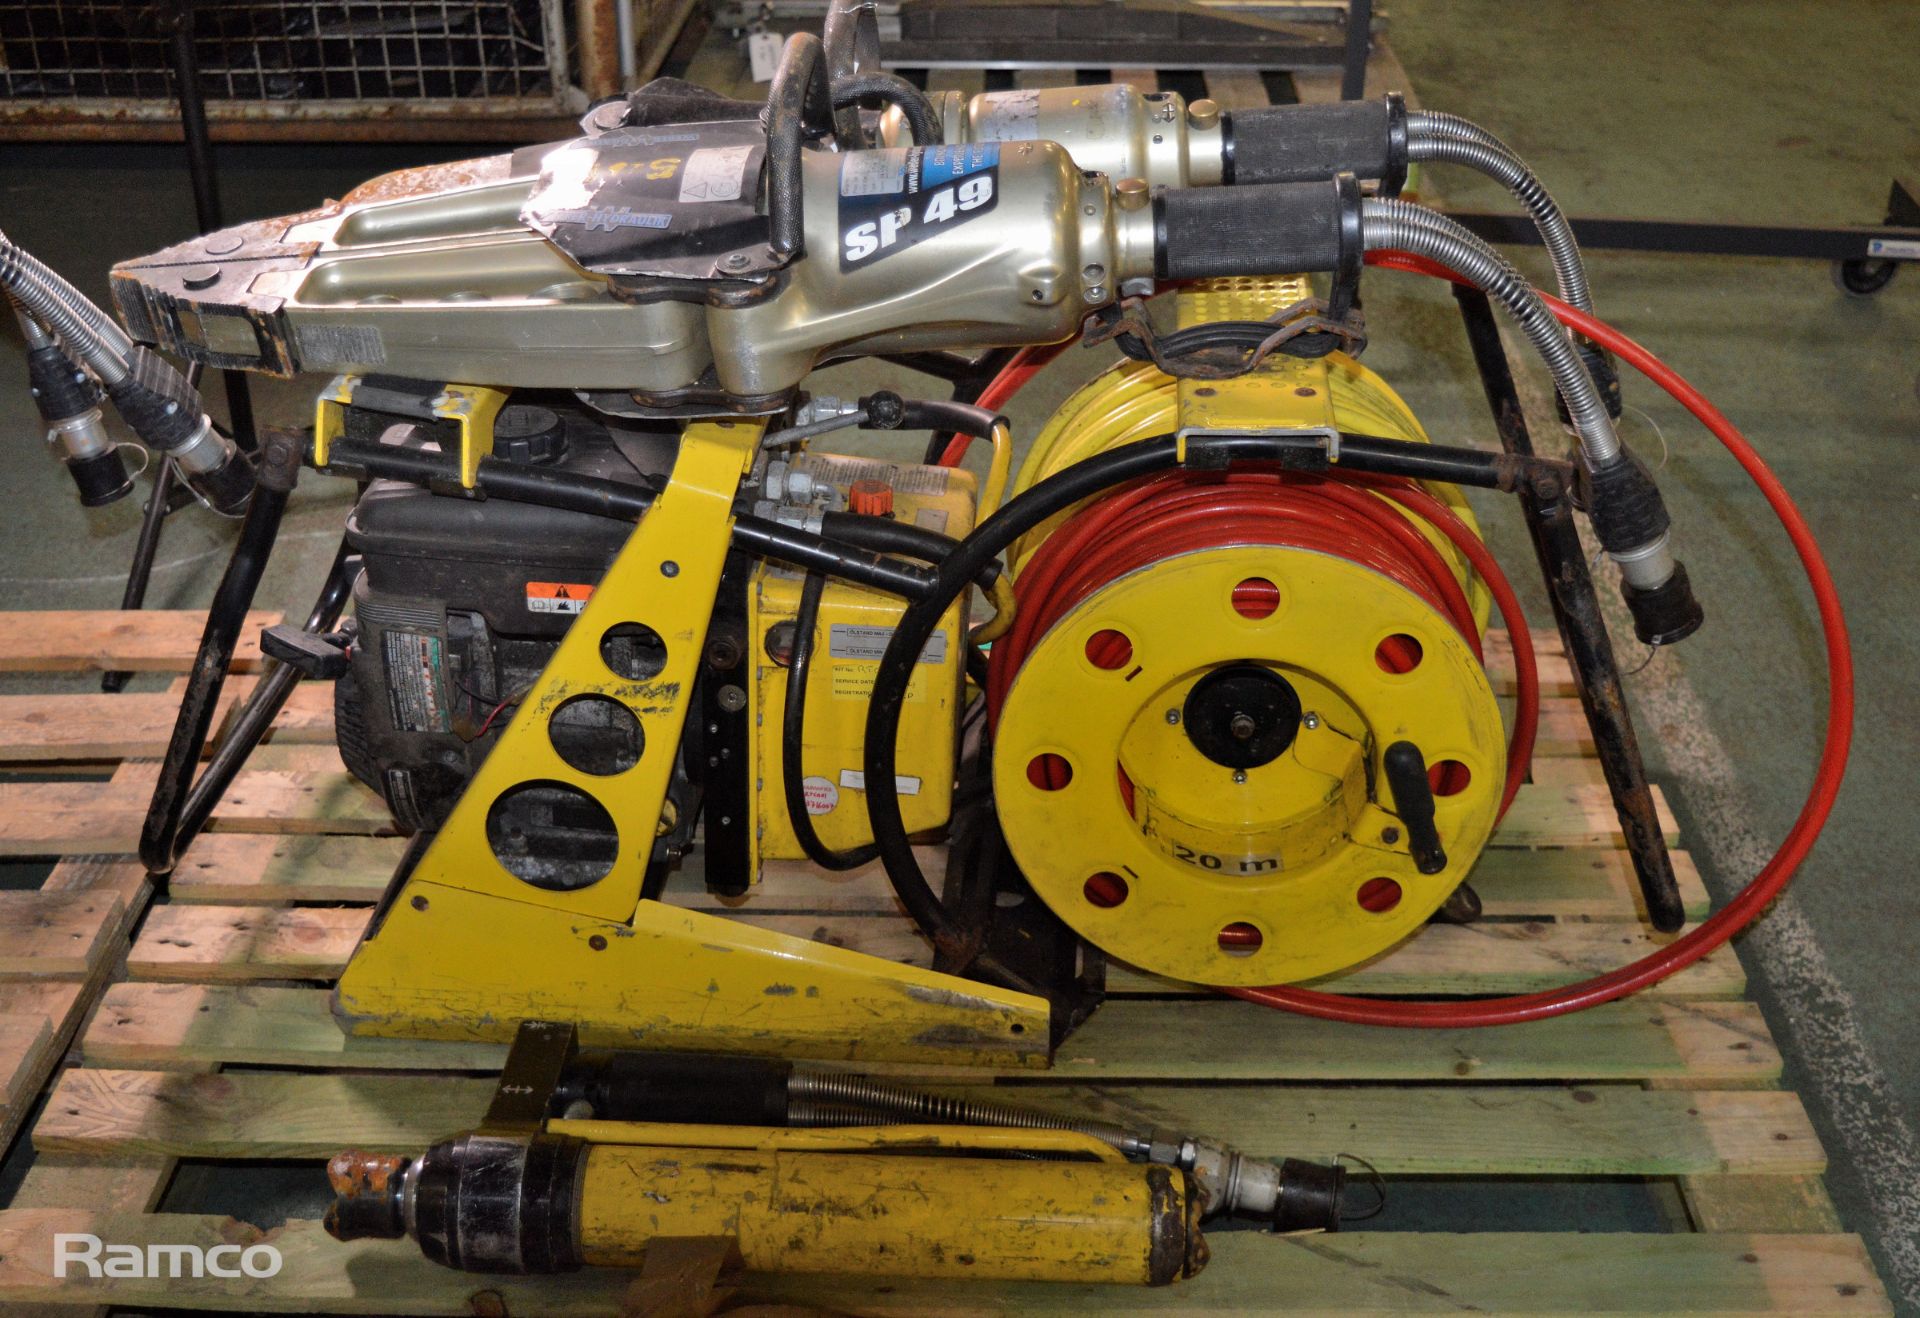 Weber Hydraulic Rescue Equipment & Accessories - Cutter, Spreader, Ram, Power pack & hoses - Image 3 of 8